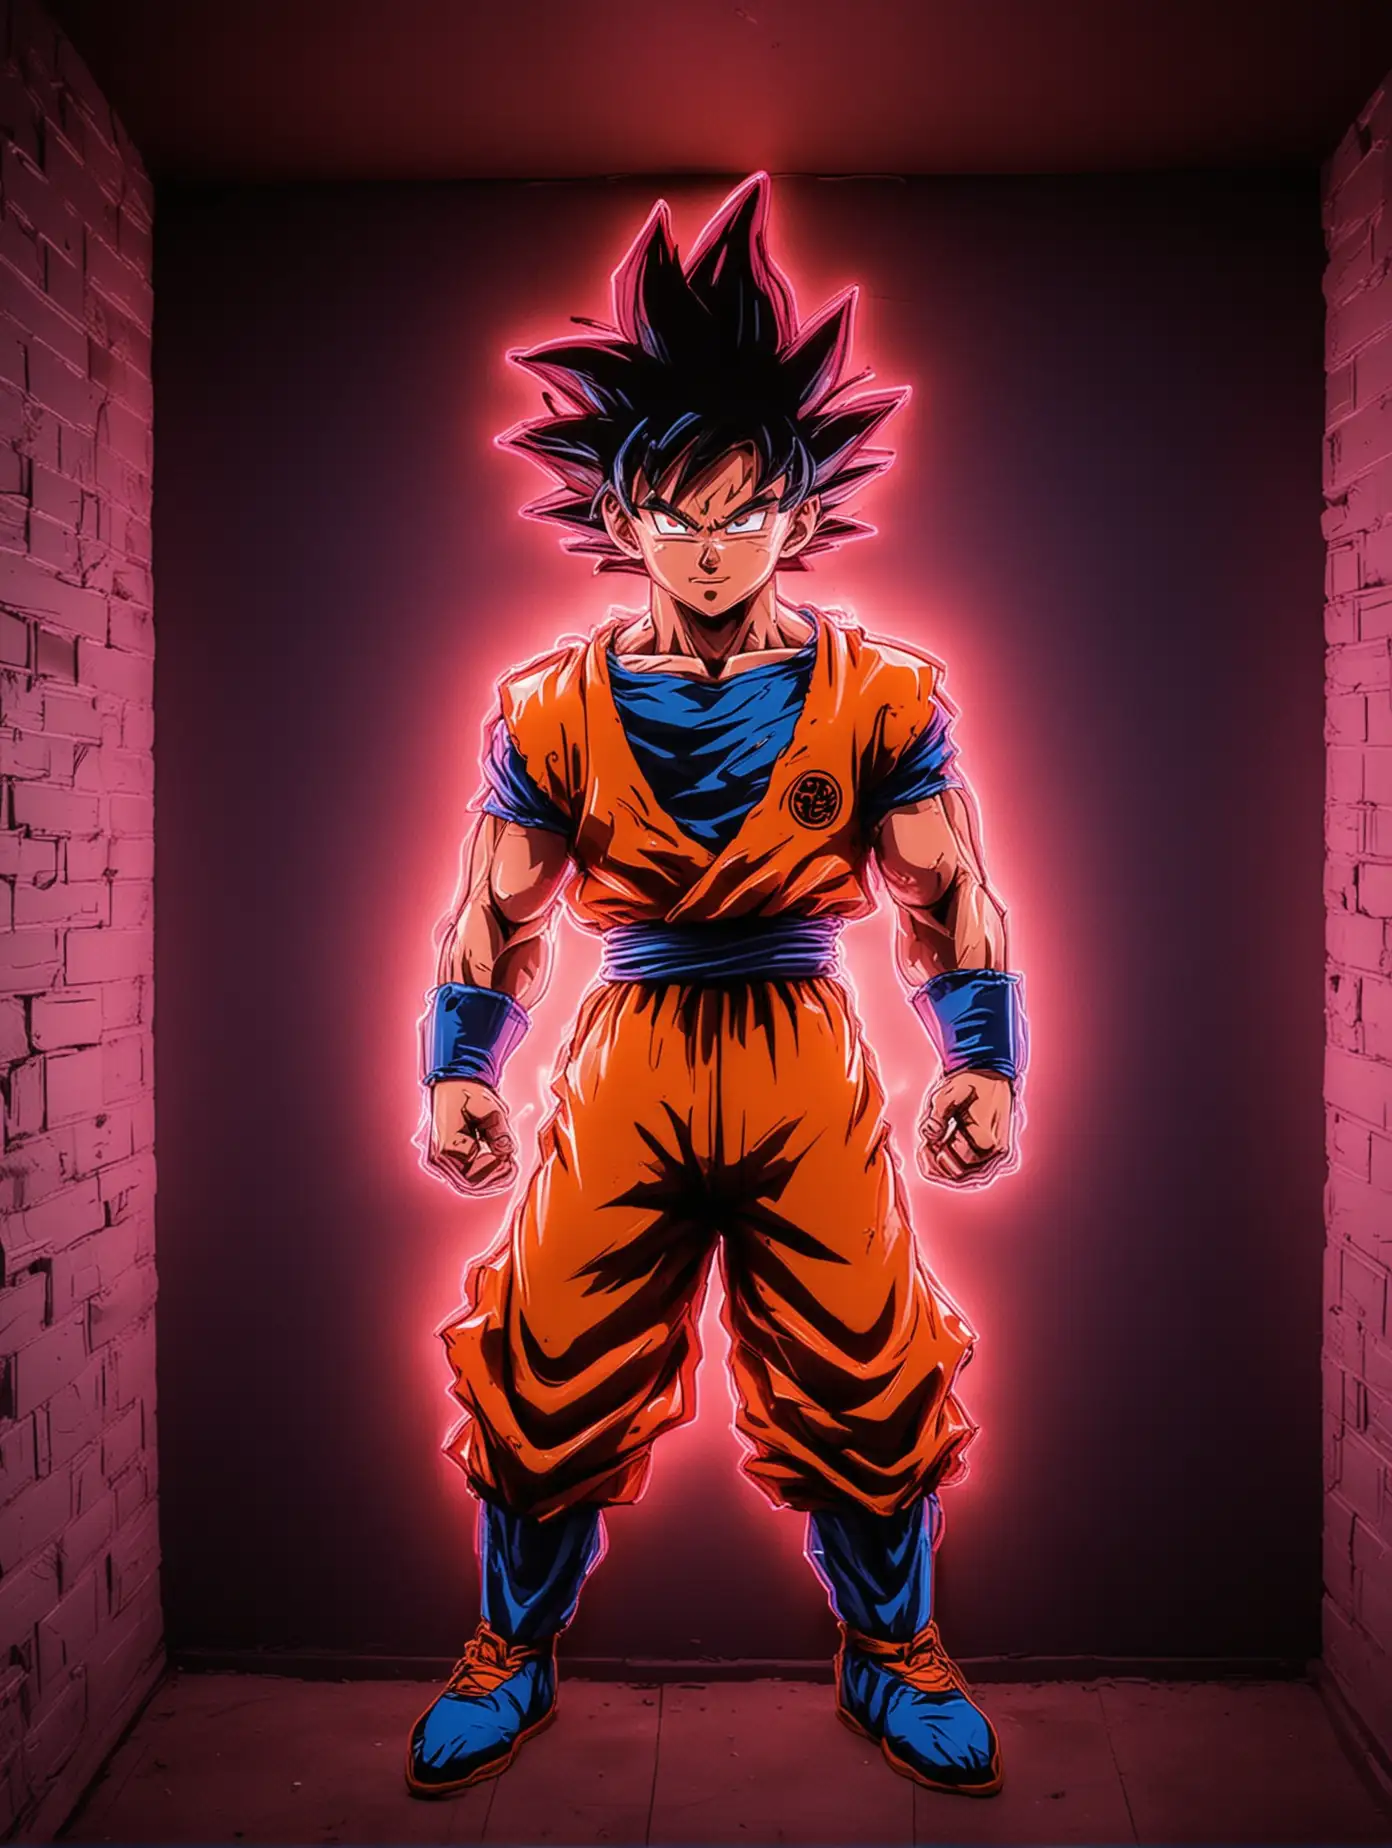 make a Dark Room. Colorful neon wall in the shape of a glowing Goku